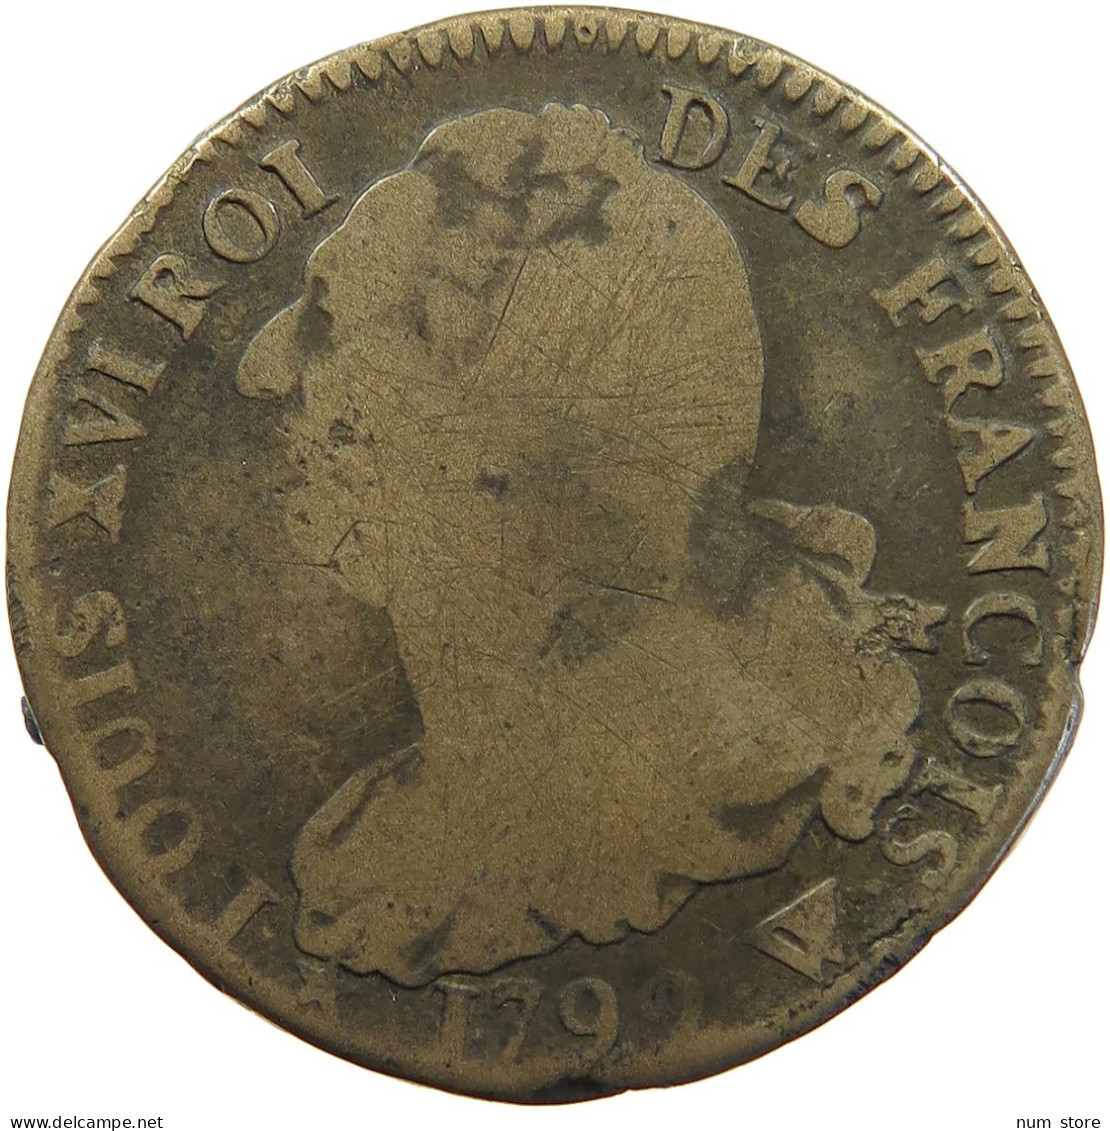 FRANCE 2 SOLS 1792 W Louis XVI. (1774-1793) #t001 0291 - 1791-1792 Constitution (An I)